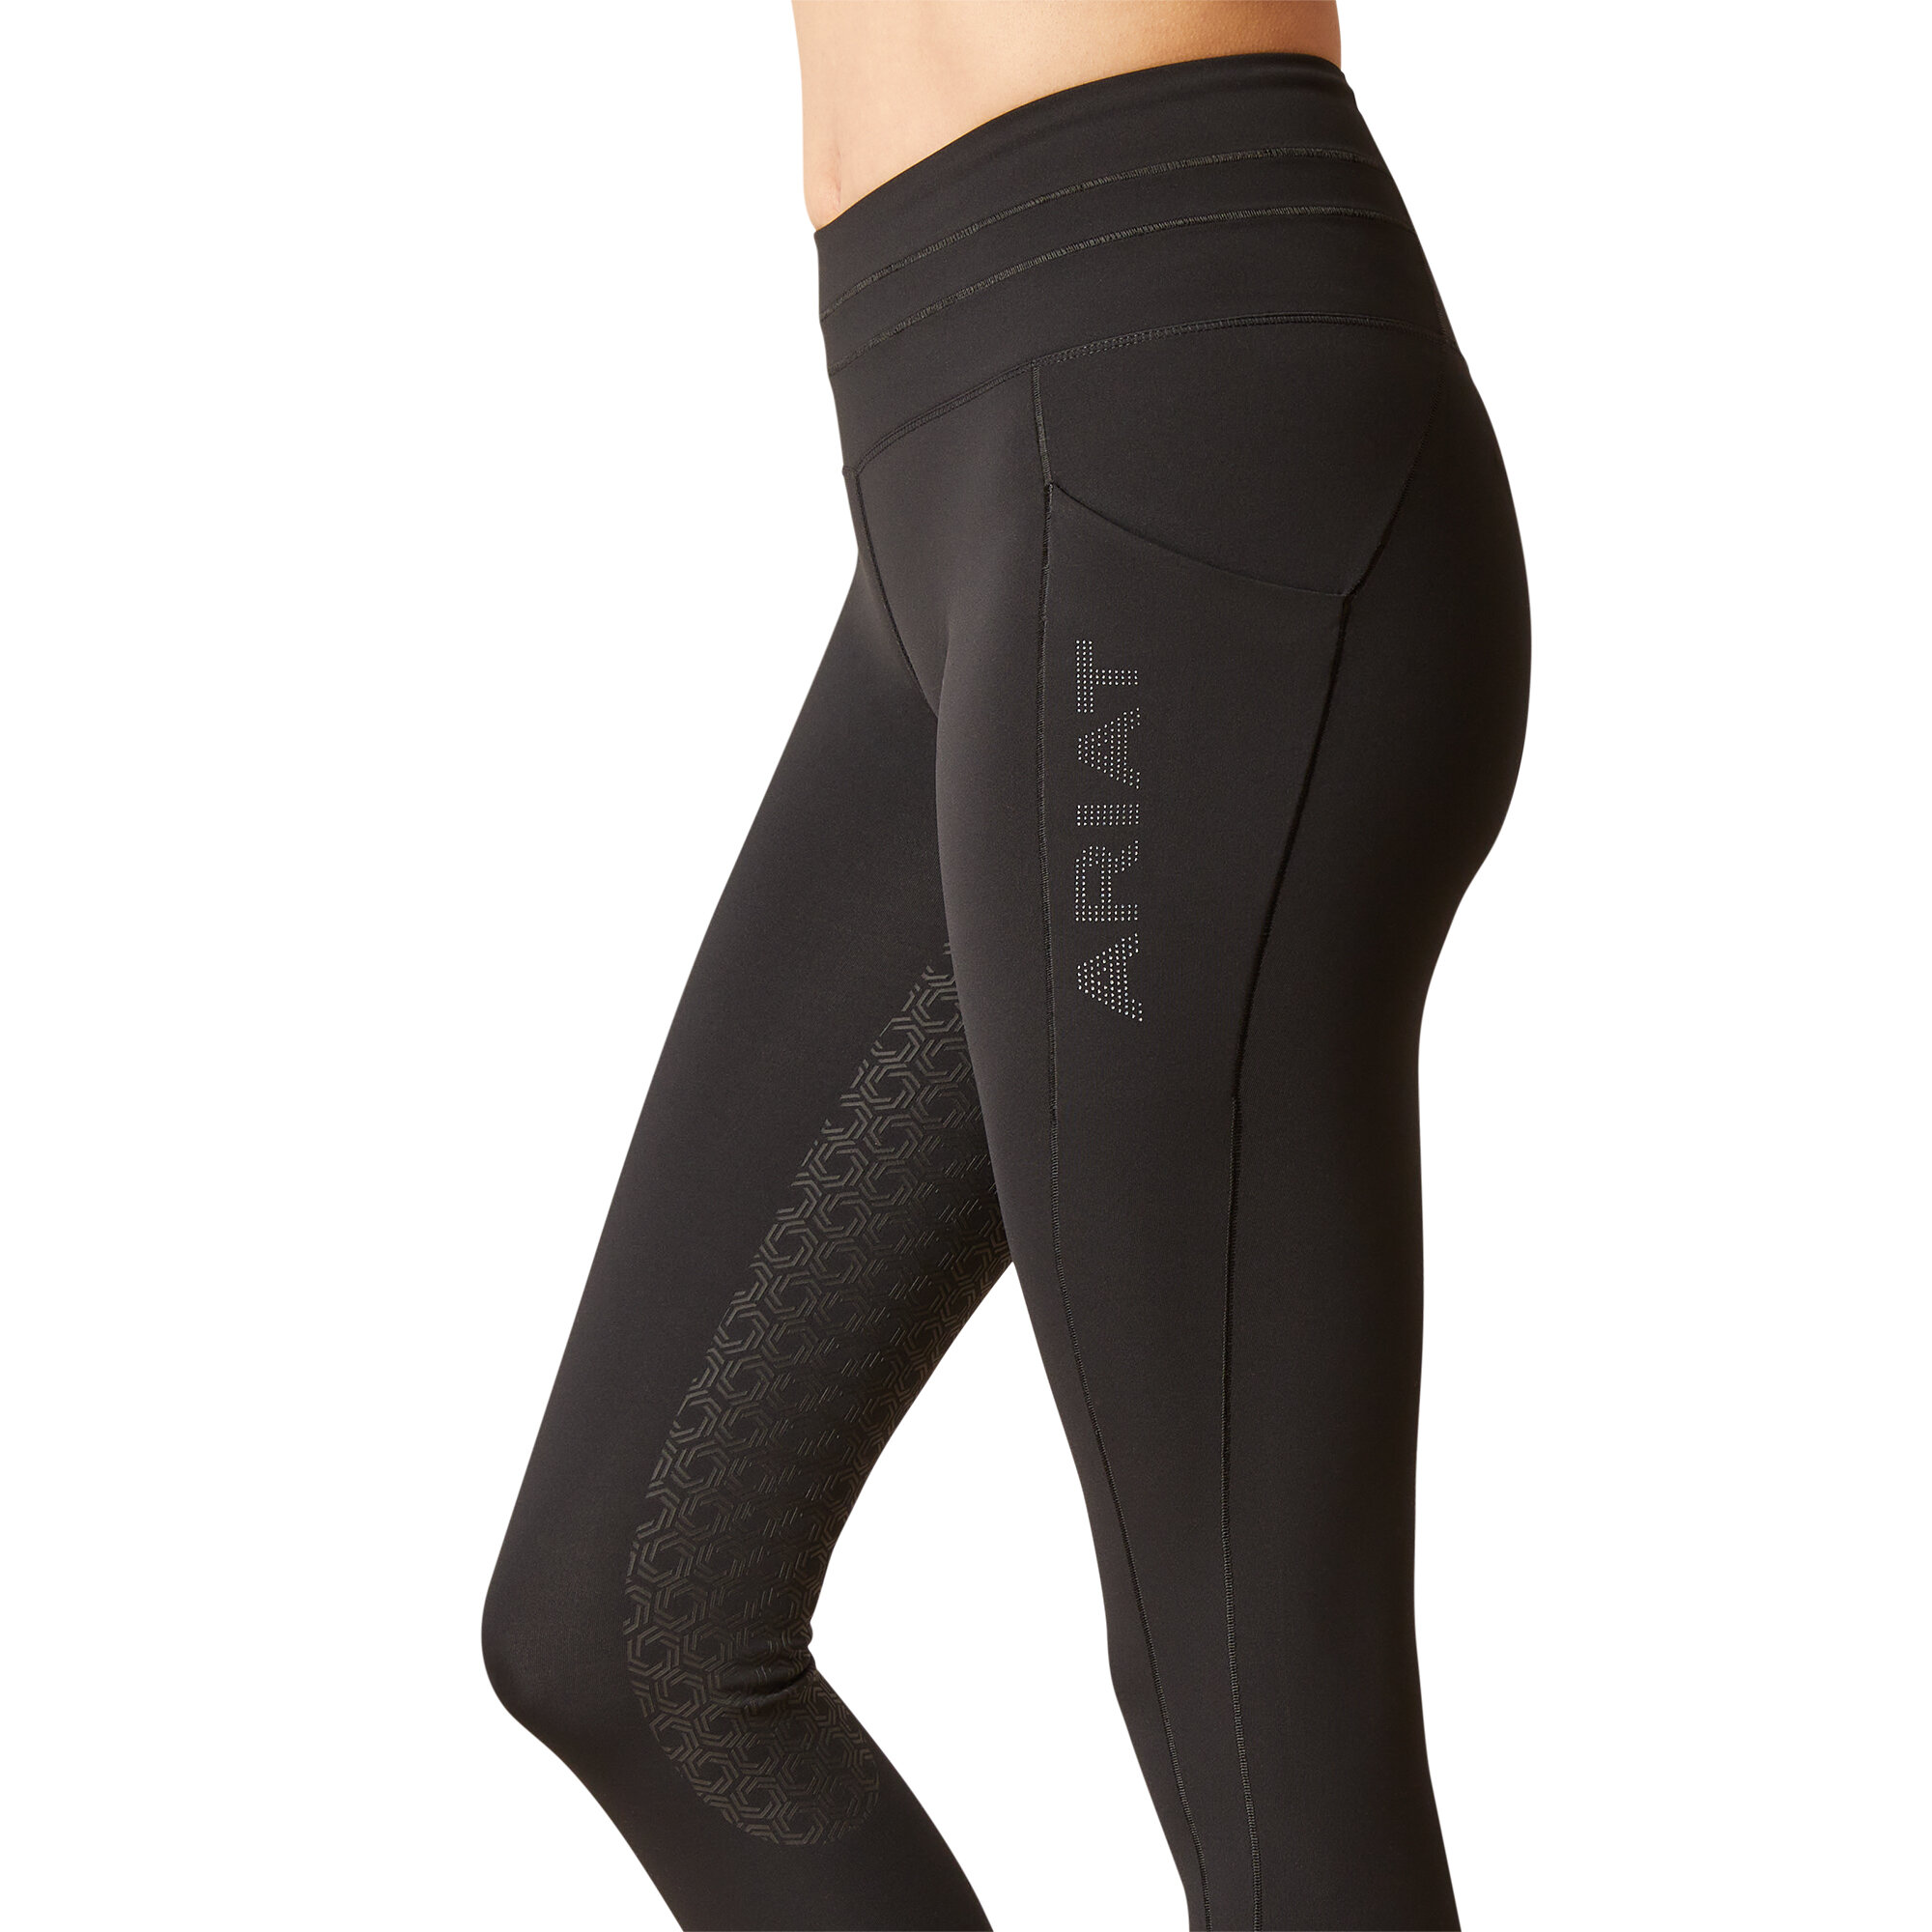 Ariat EOS Full Grip Seat Riding Tights - Ladies Pull On Riding Tights